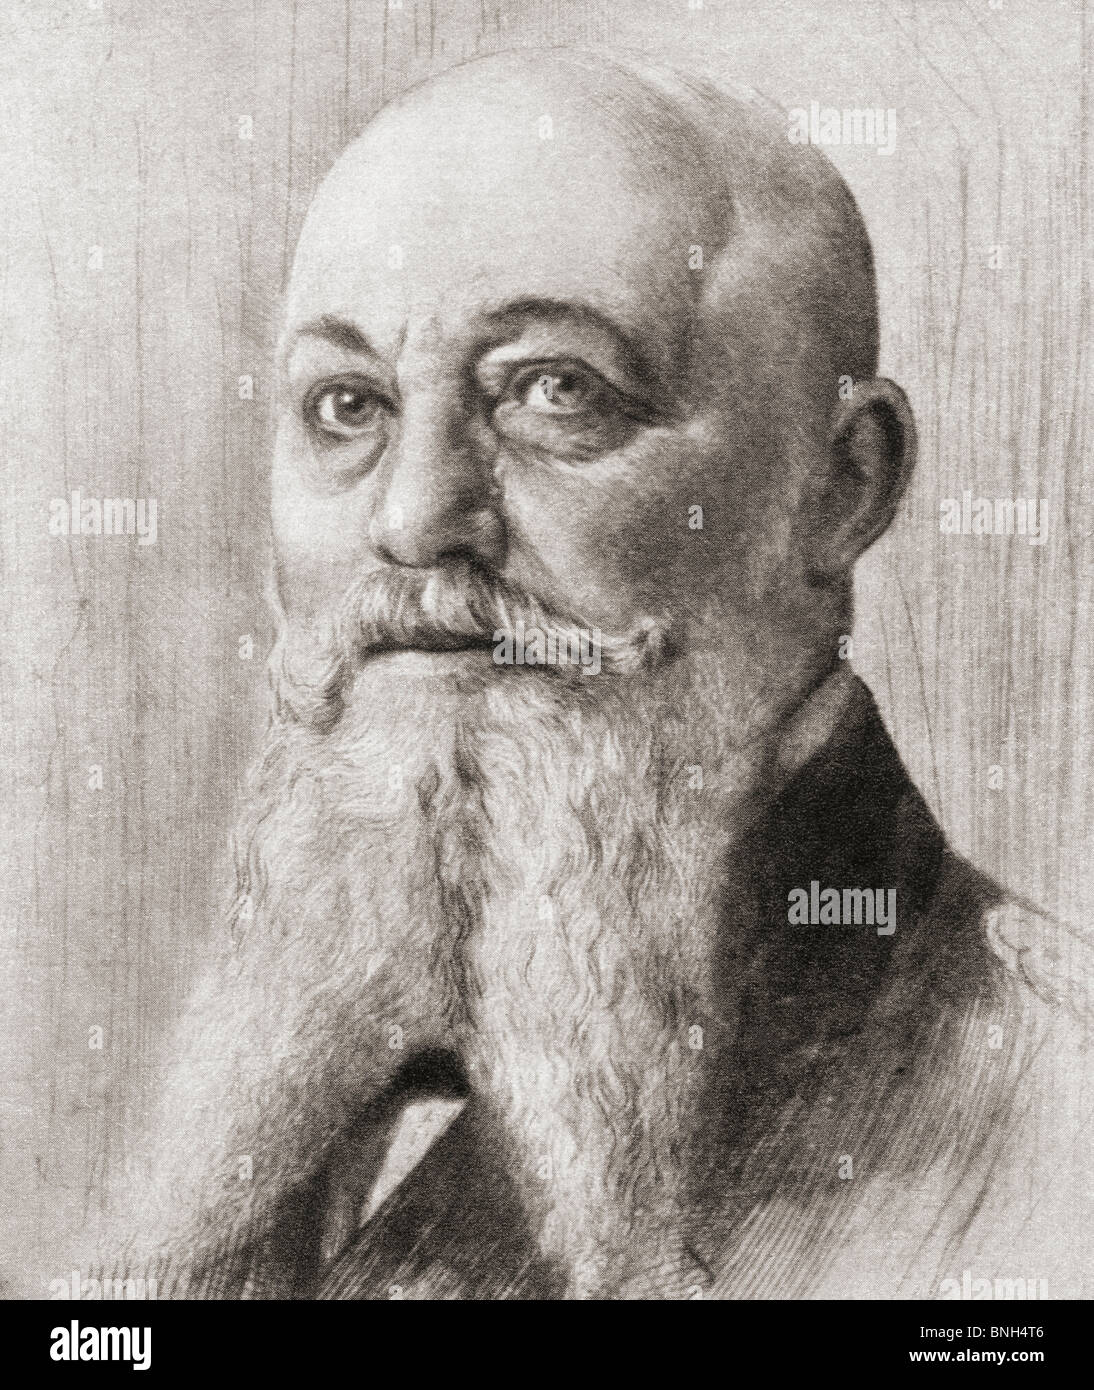 Alfred von Tirpitz, 1849 to 1930. German Admiral, Secretary of State of the German Imperial Naval Office. Stock Photo